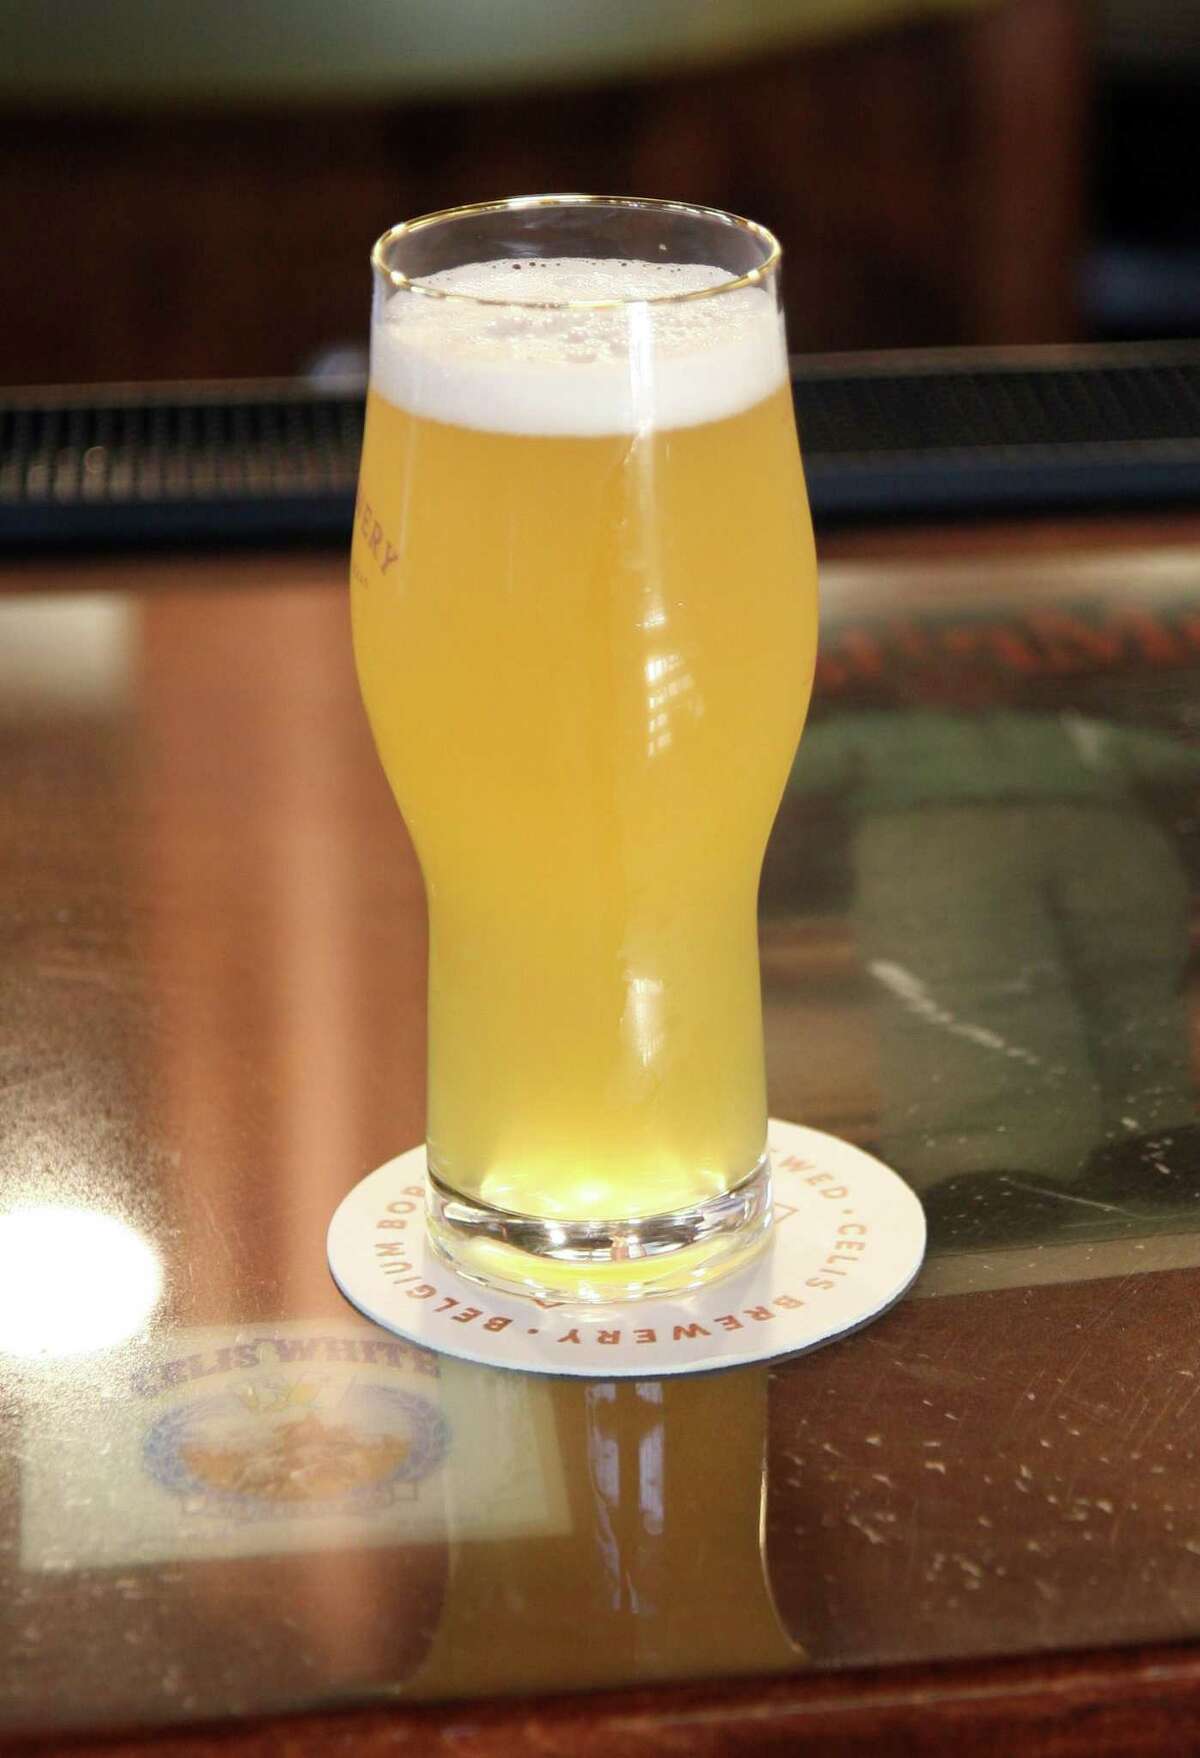 Celis White, a classic Belgian-style witbier, displays its classic straw color, haziness, and thick, bright head.